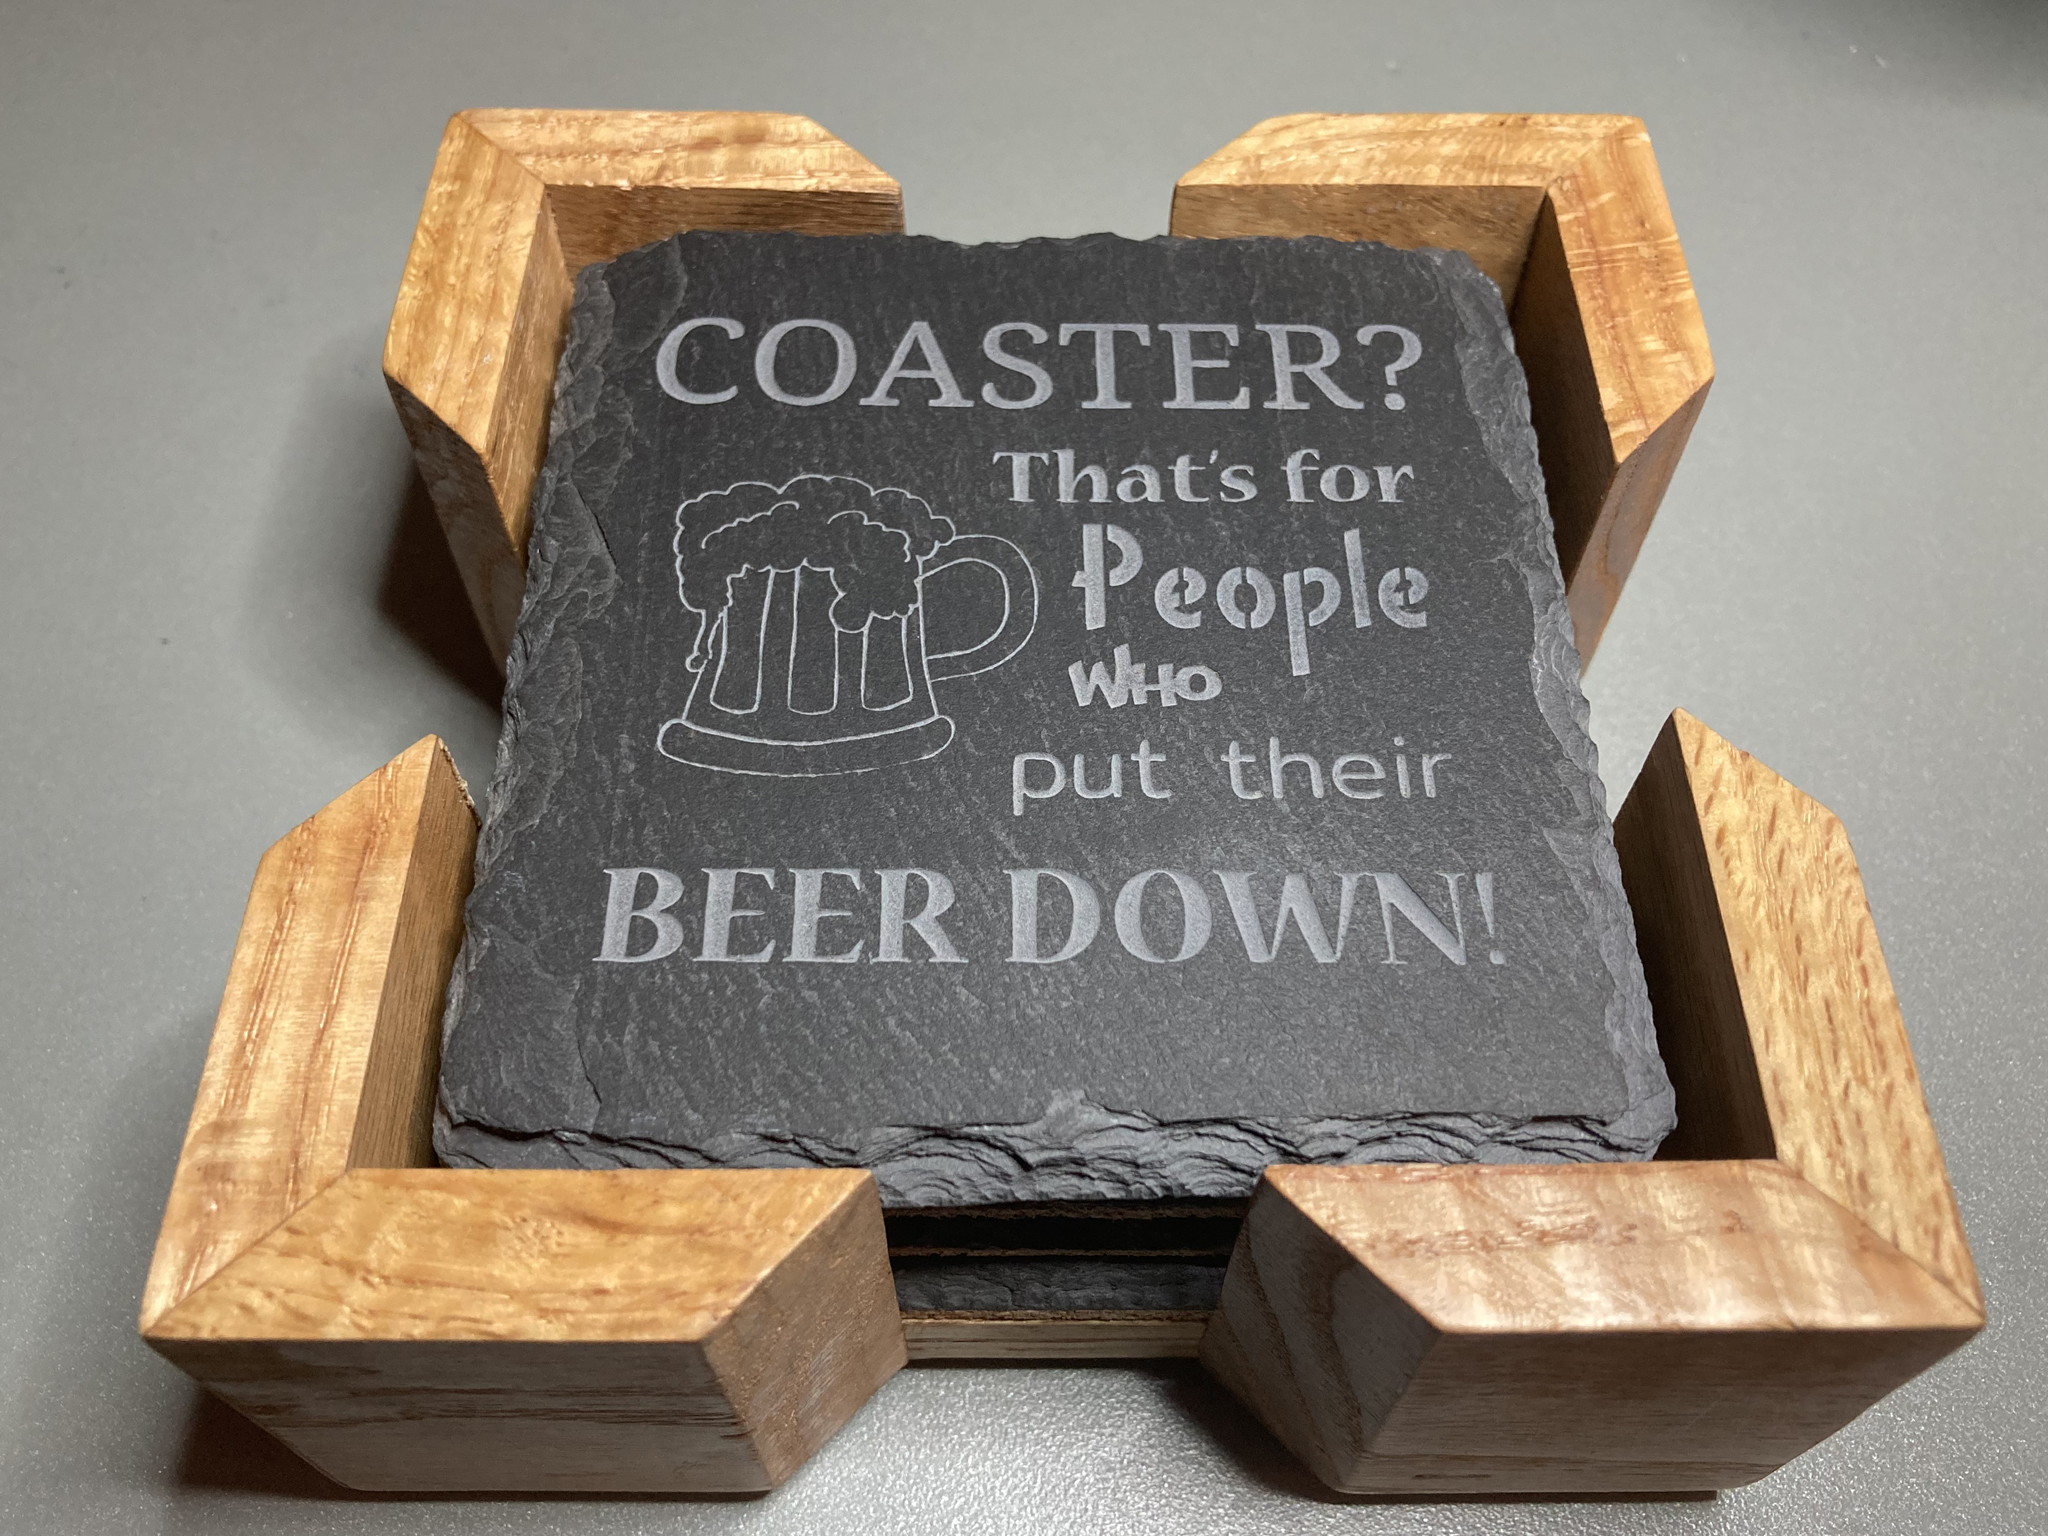 Coaster? That's for people who put their beer down! The perfect gift for that beer lover in your life. Coaster holder and gift box sold separately.